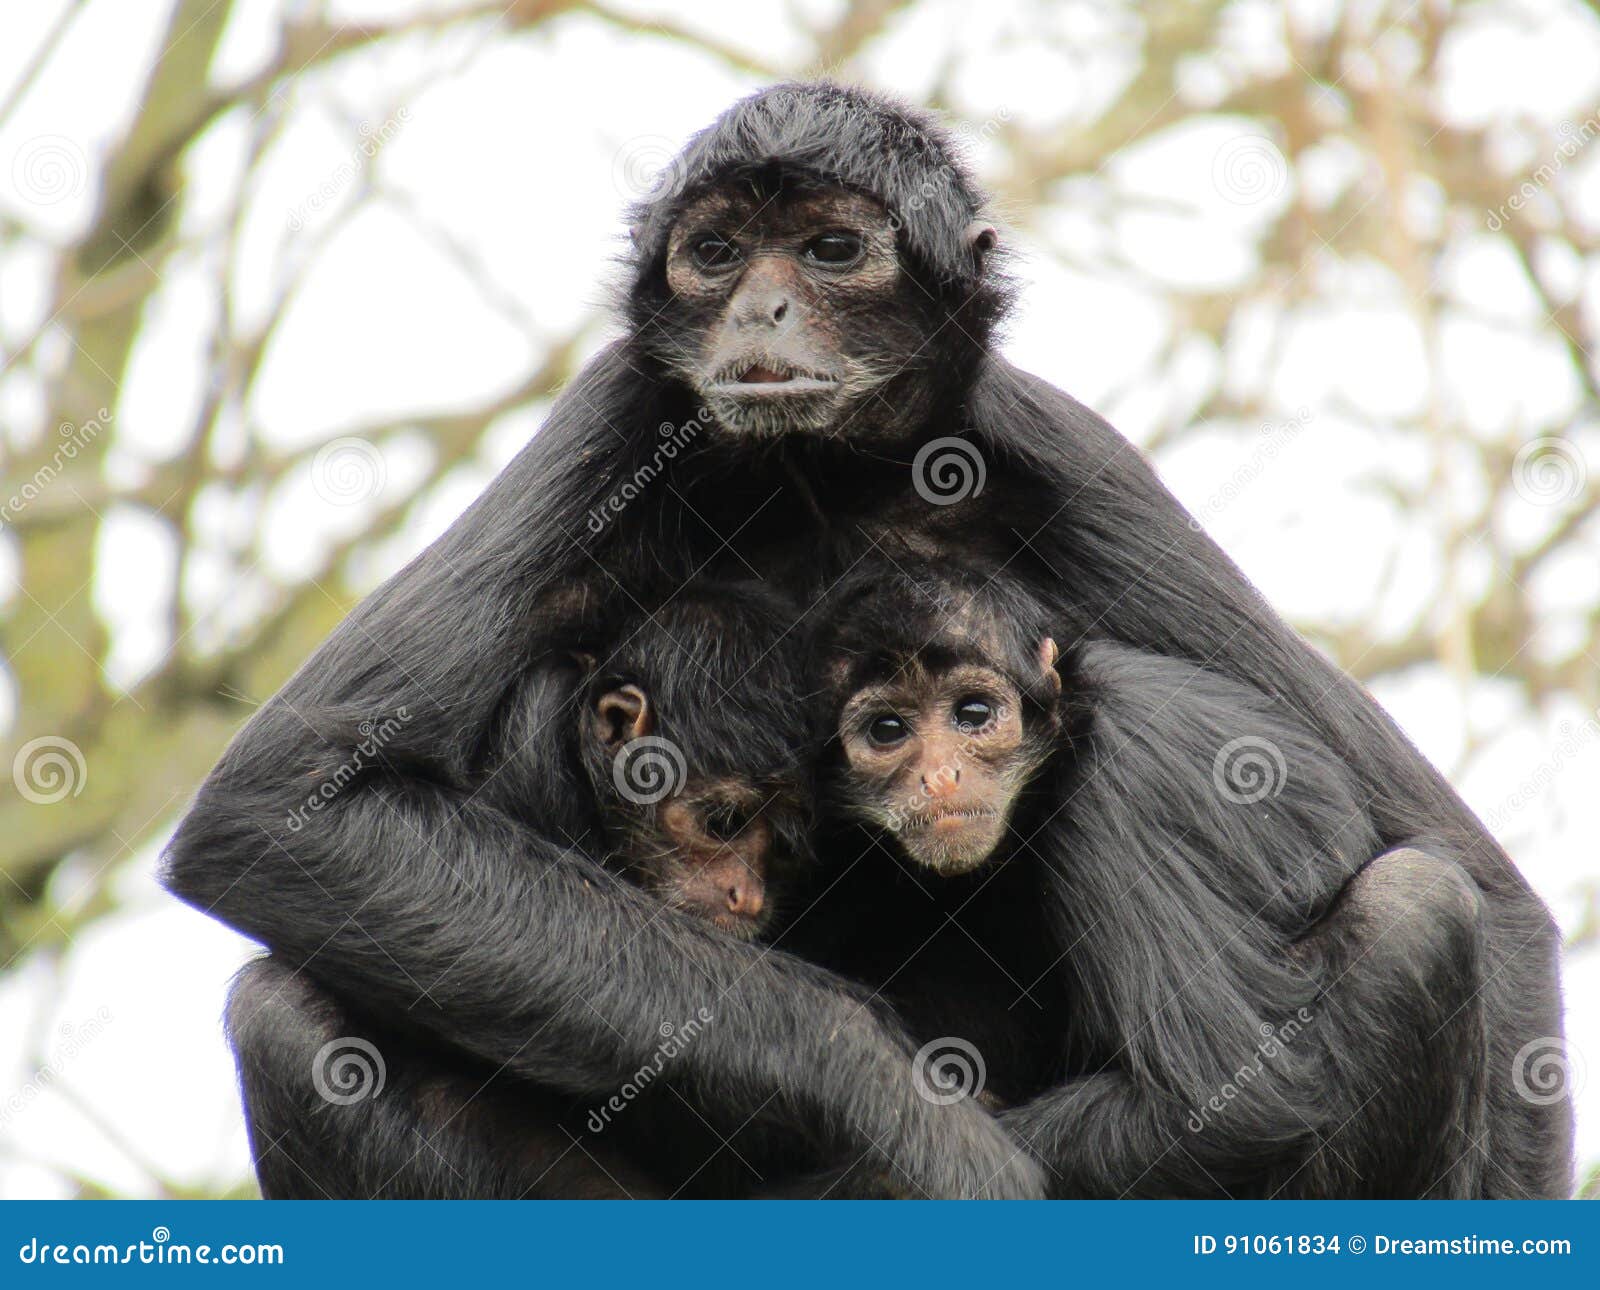 colombian spider monkey family